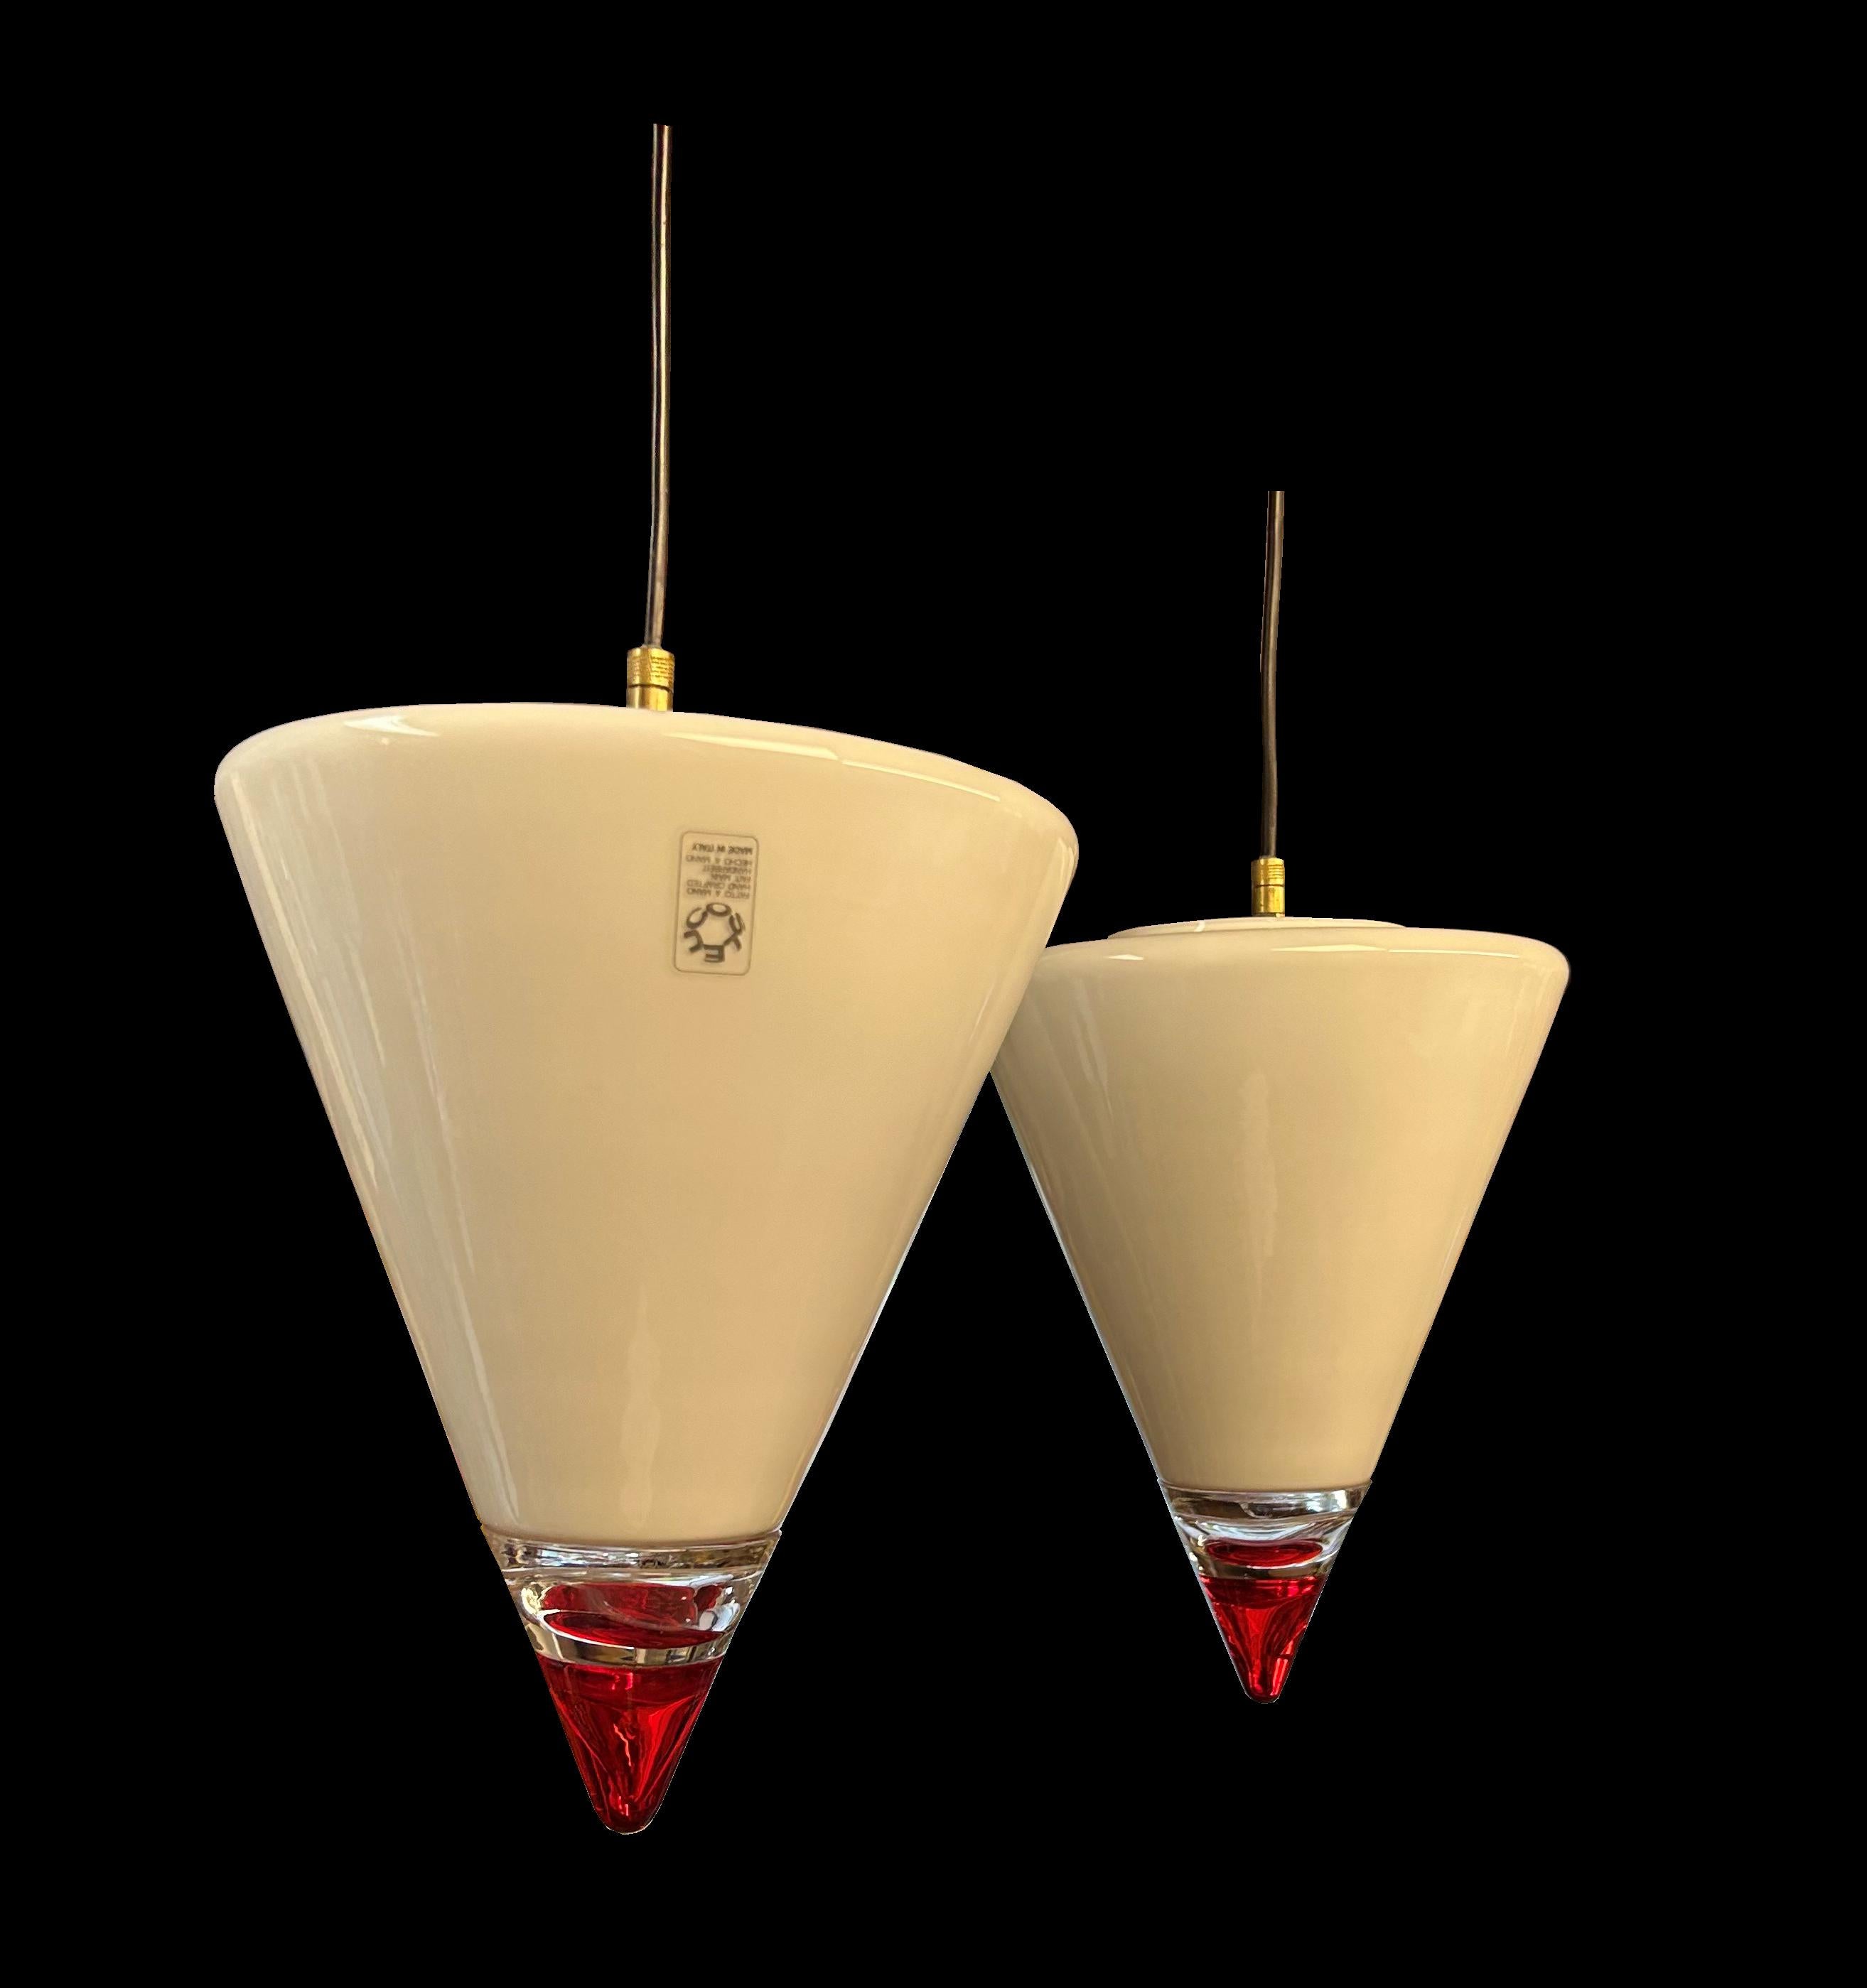 Pair of Hanging Lights by Leucos In Excellent Condition For Sale In Little Burstead, Essex